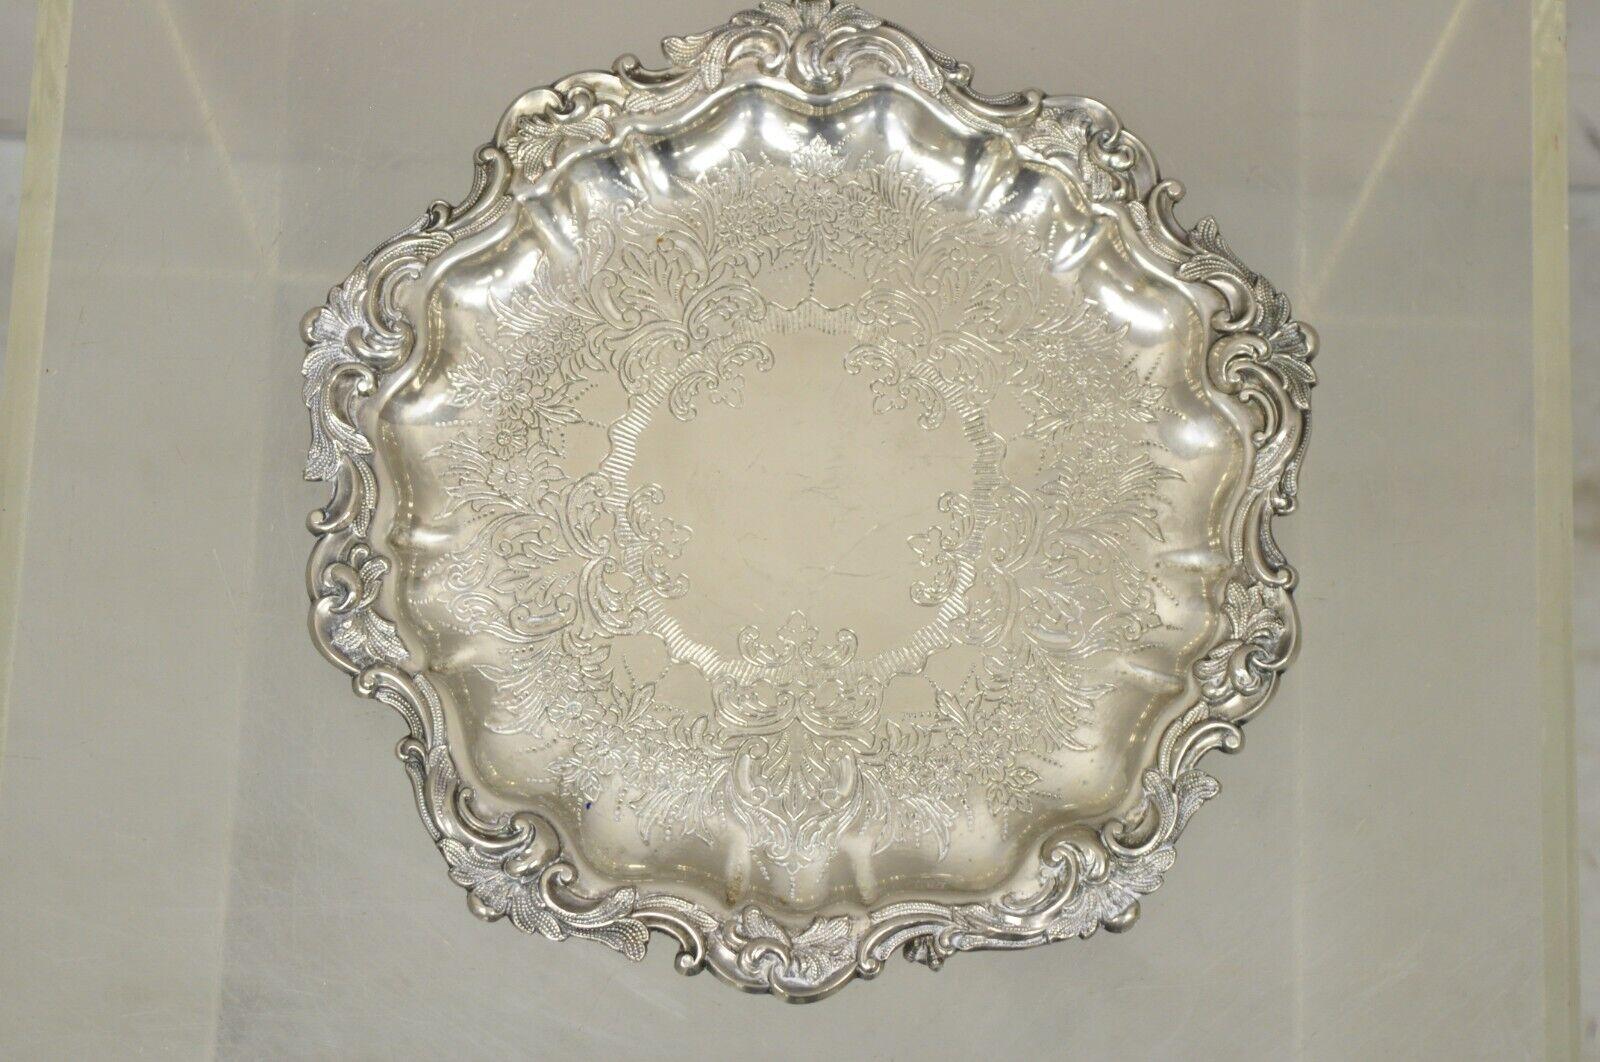 Victorian Silver Plated Small Scalloped Round Serving Platter Tray on Feet. Item features 3 Ball and Claw Paw Feet, Floral Etched Center, Nice Small Size. Circa Mid 20th Century. Measurements: 1